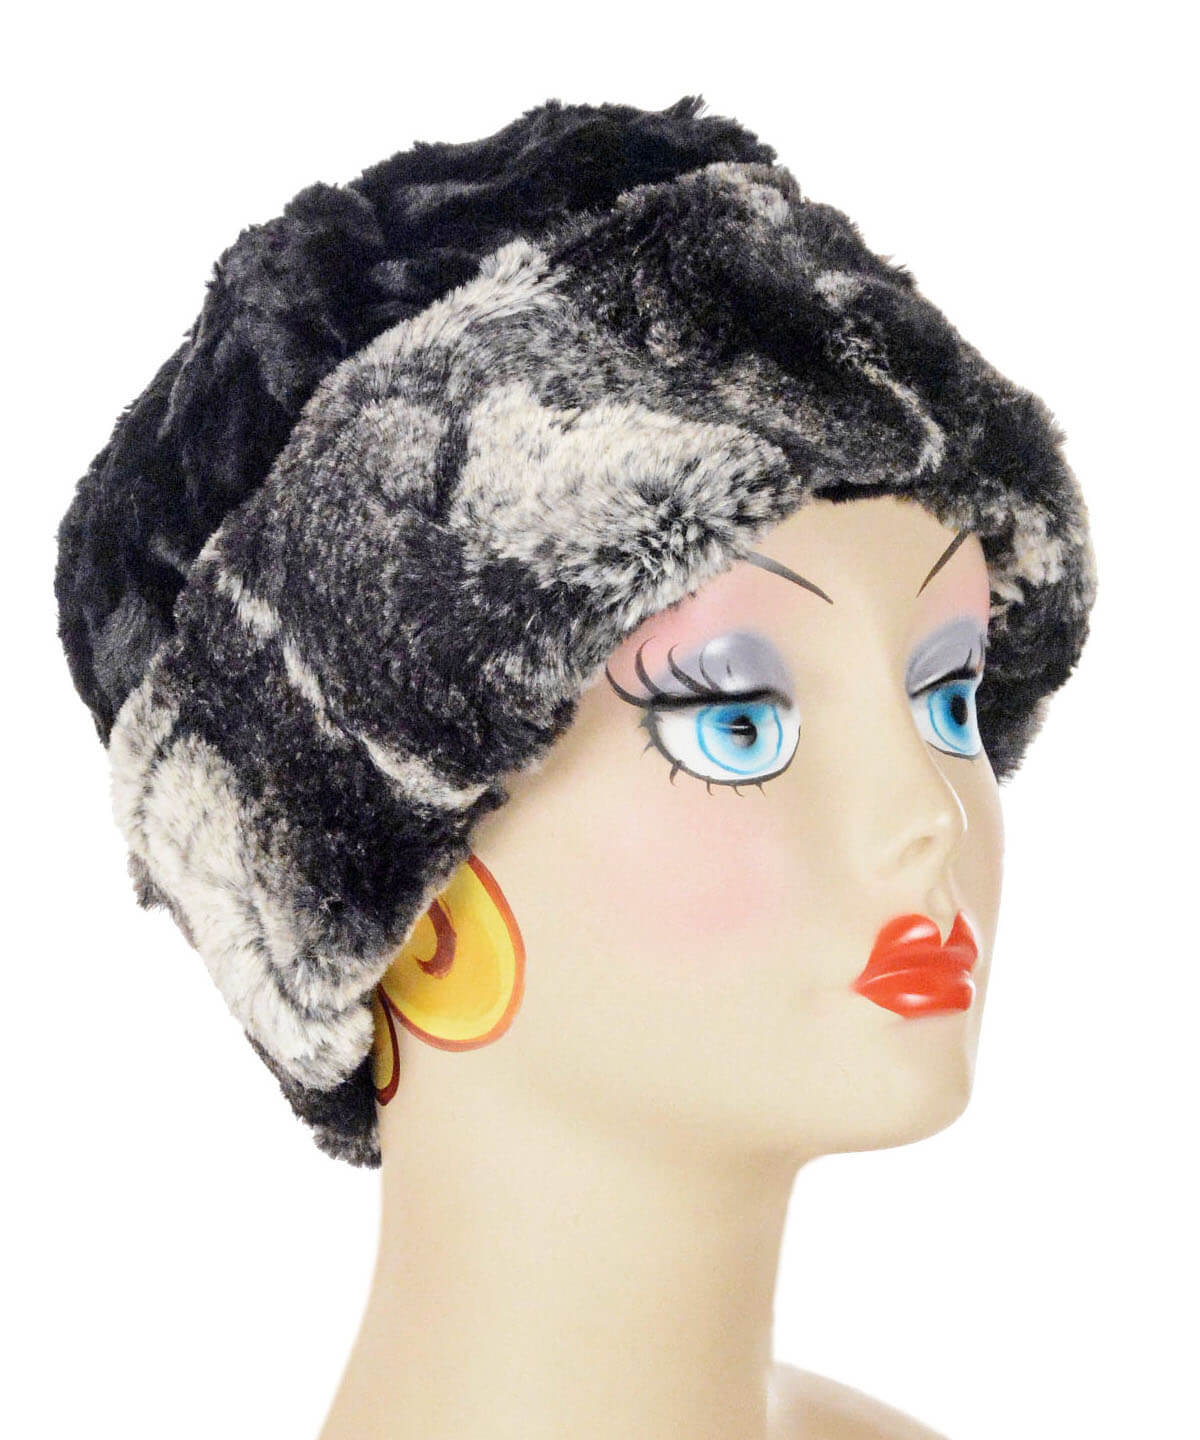 Beanie Hat, Reversible - Luxury Faux Fur in Honey Badger with Pom Pom shown in reverse - By Pandemonium Millinery